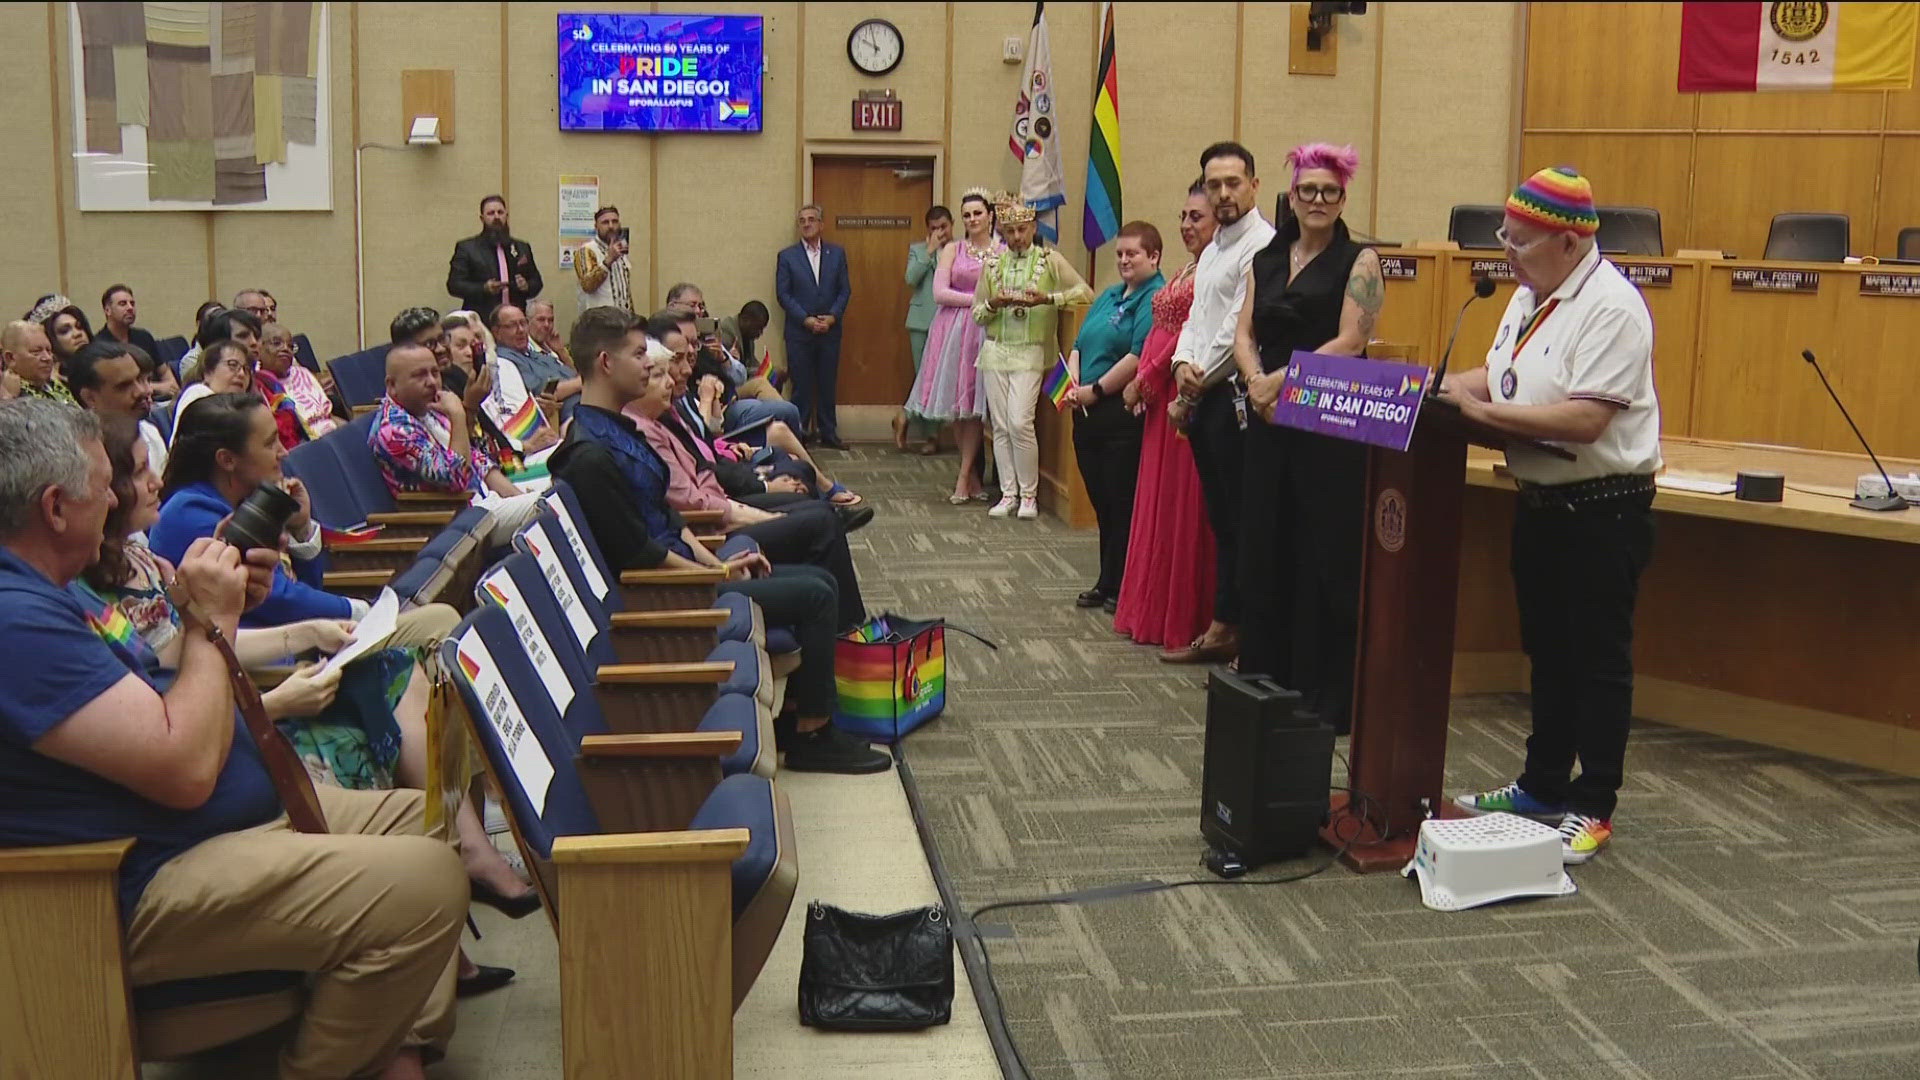 San Diego city leaders joined Pride honorees at city hall Monday morning to kick off San Diego Pride month.